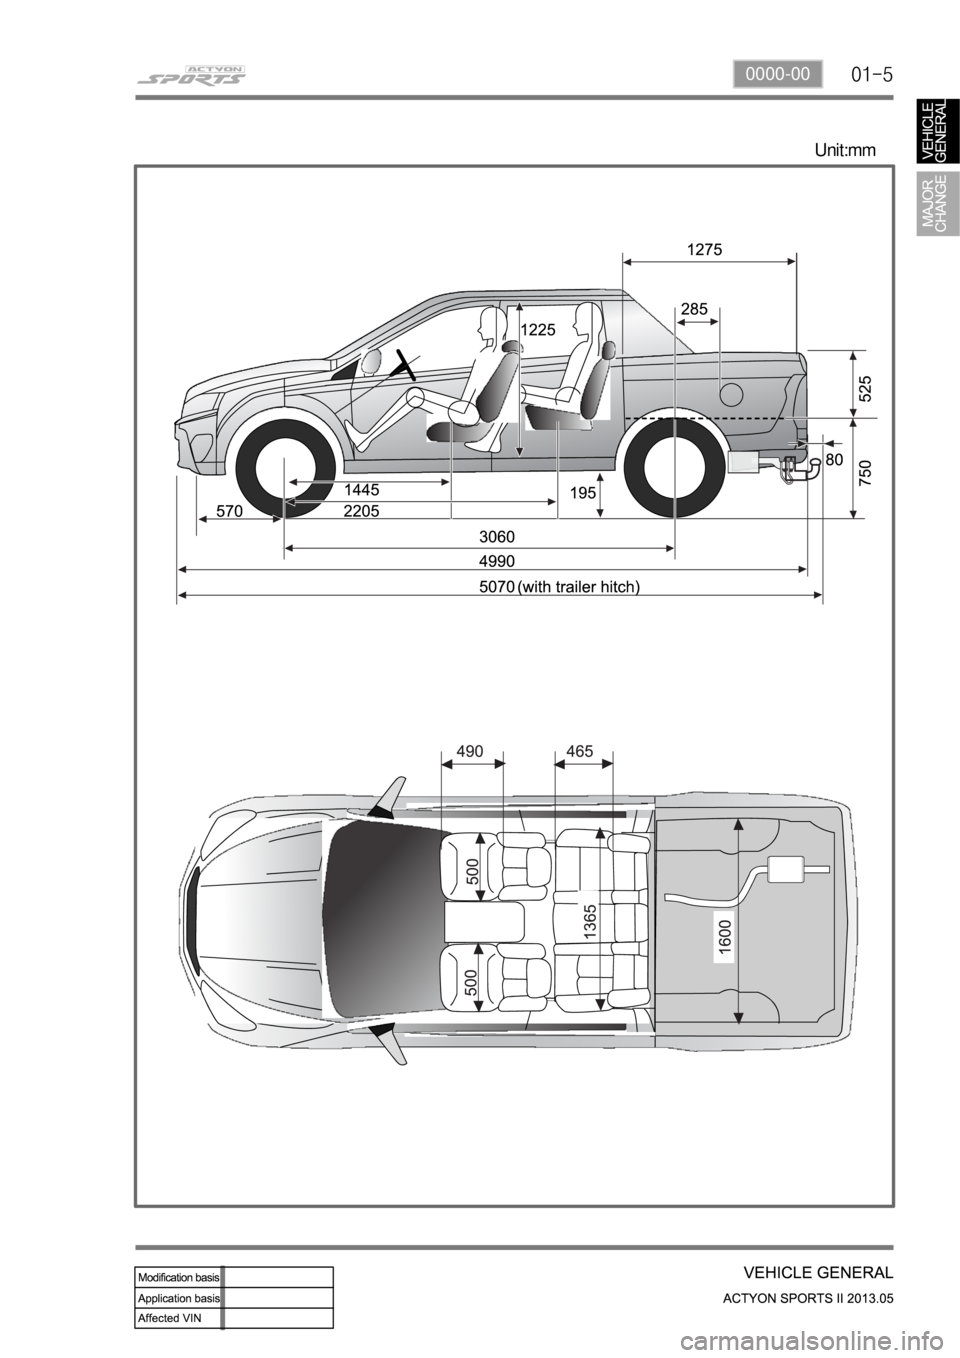 SSANGYONG NEW ACTYON SPORTS 2013  Service Manual 01-50000-00
Unit:mm 